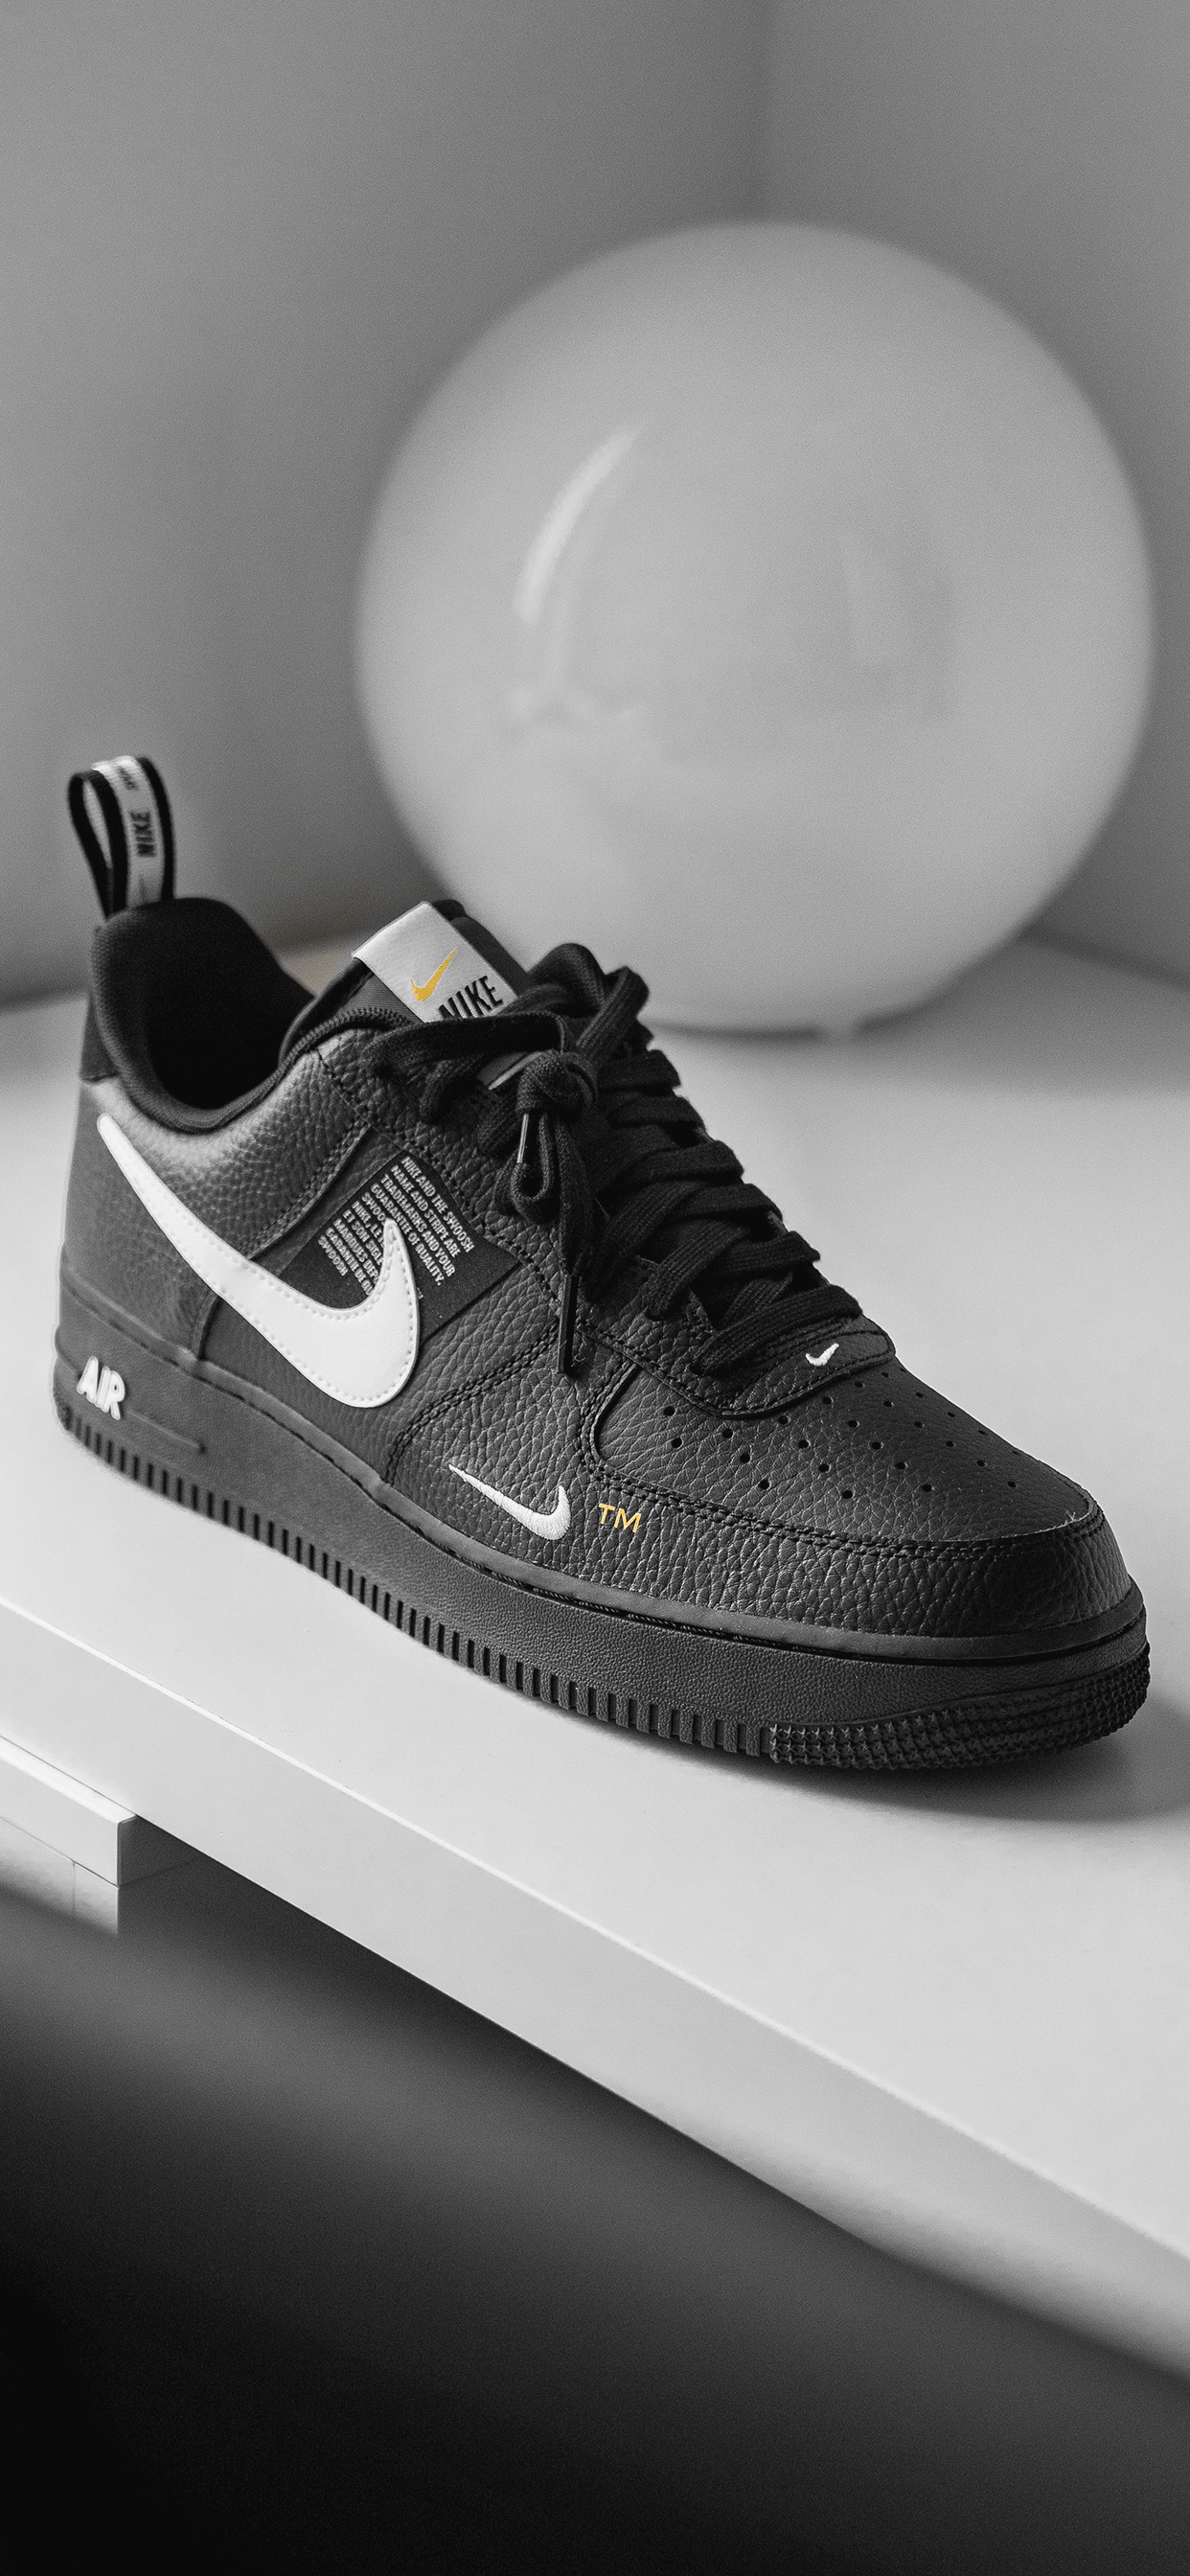 Nike Air Force 1 Wallpapers for iPhone X, 8, 7, 6